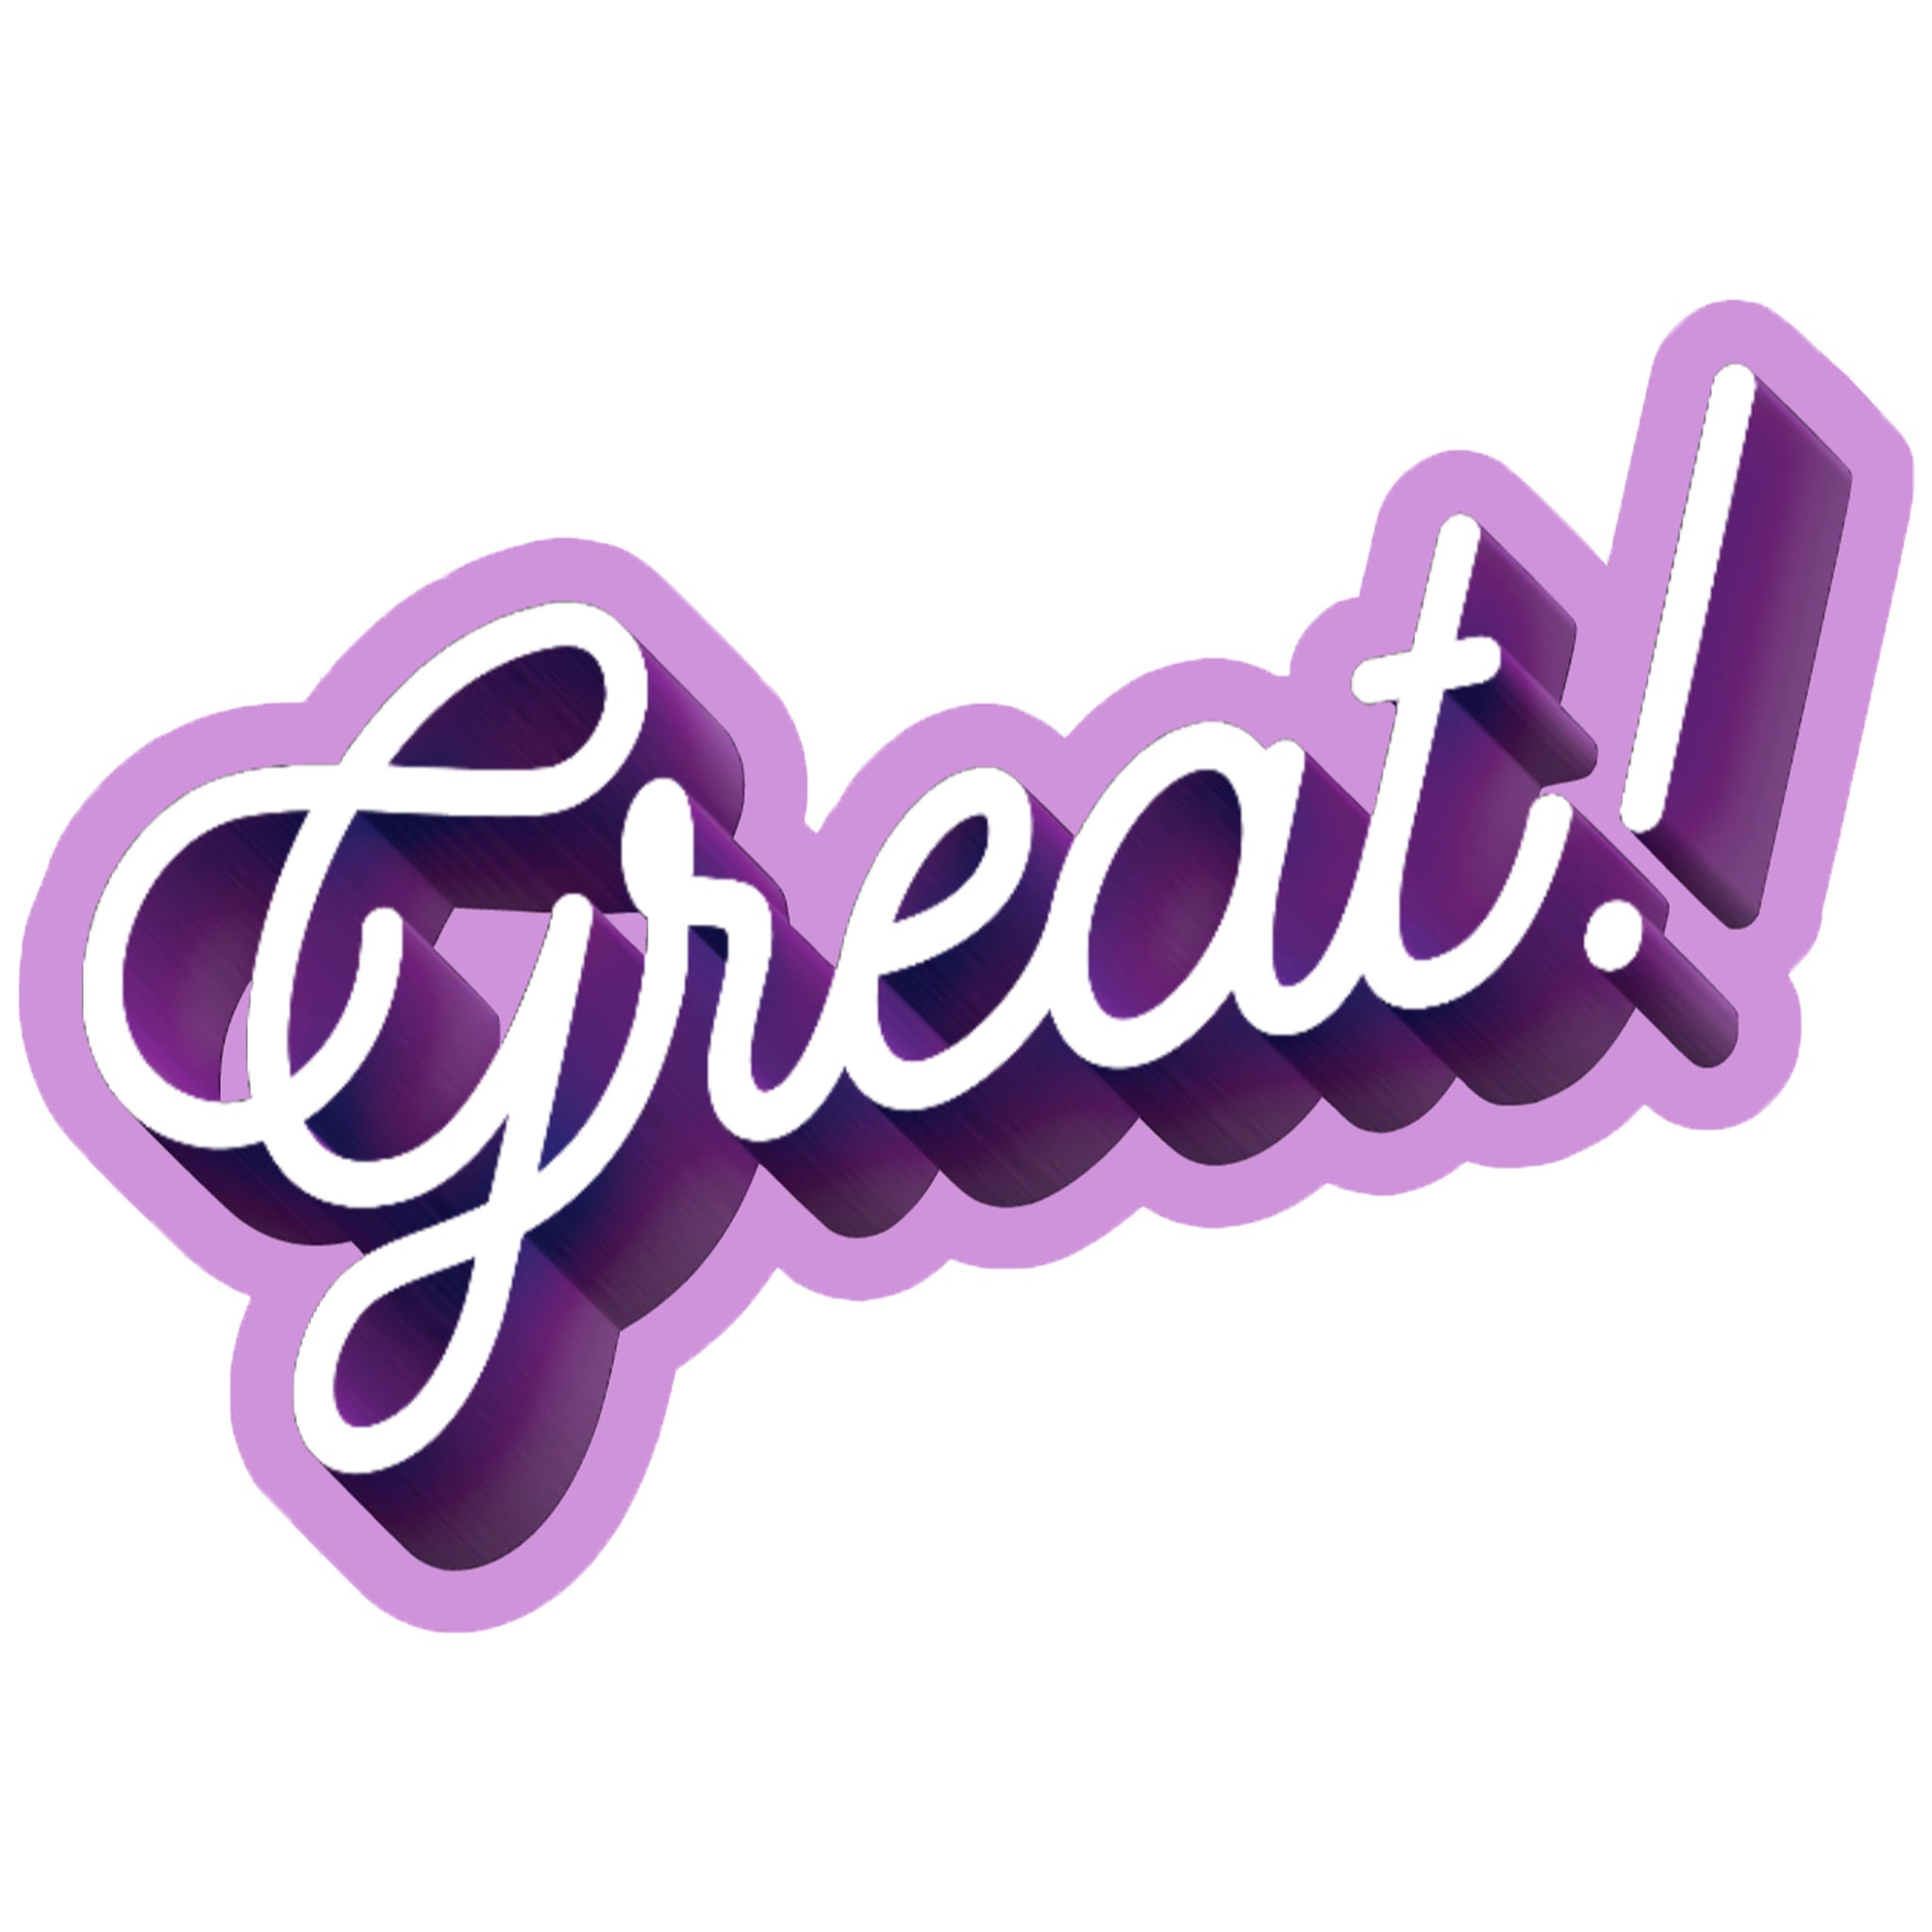 the word Great in white cursive with dark and light purple outline